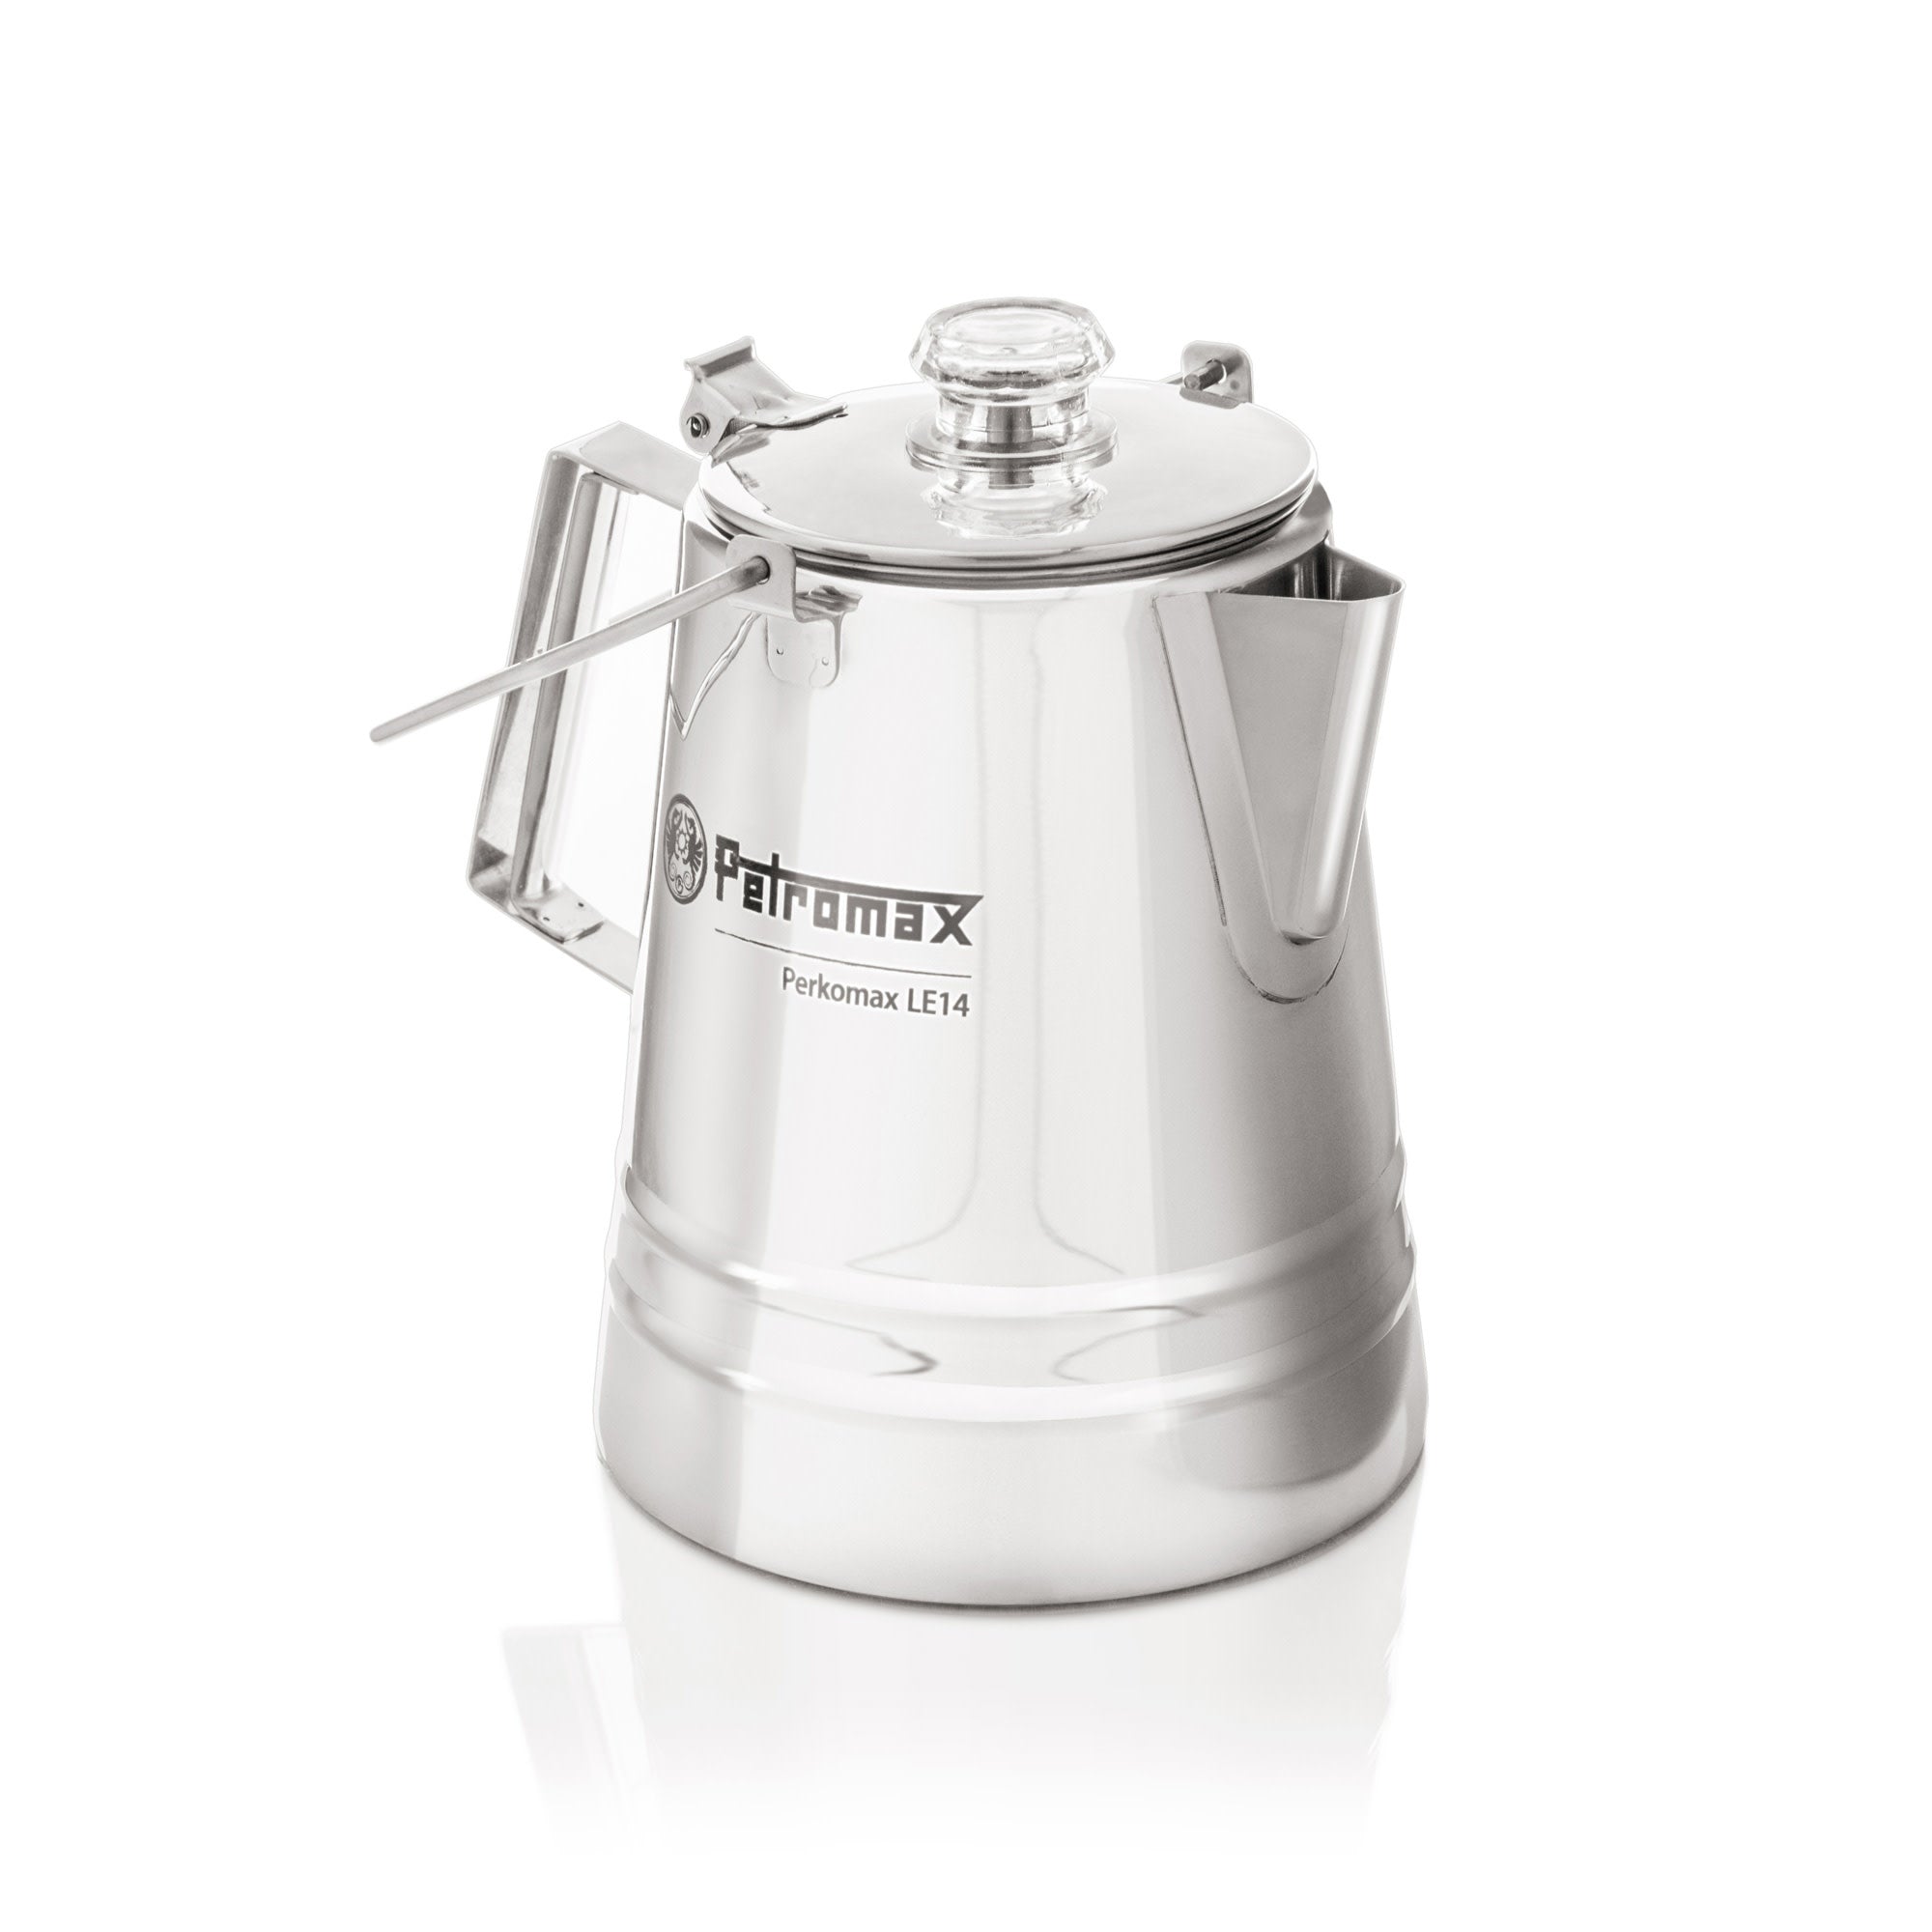 Percolator LE14 Stainless